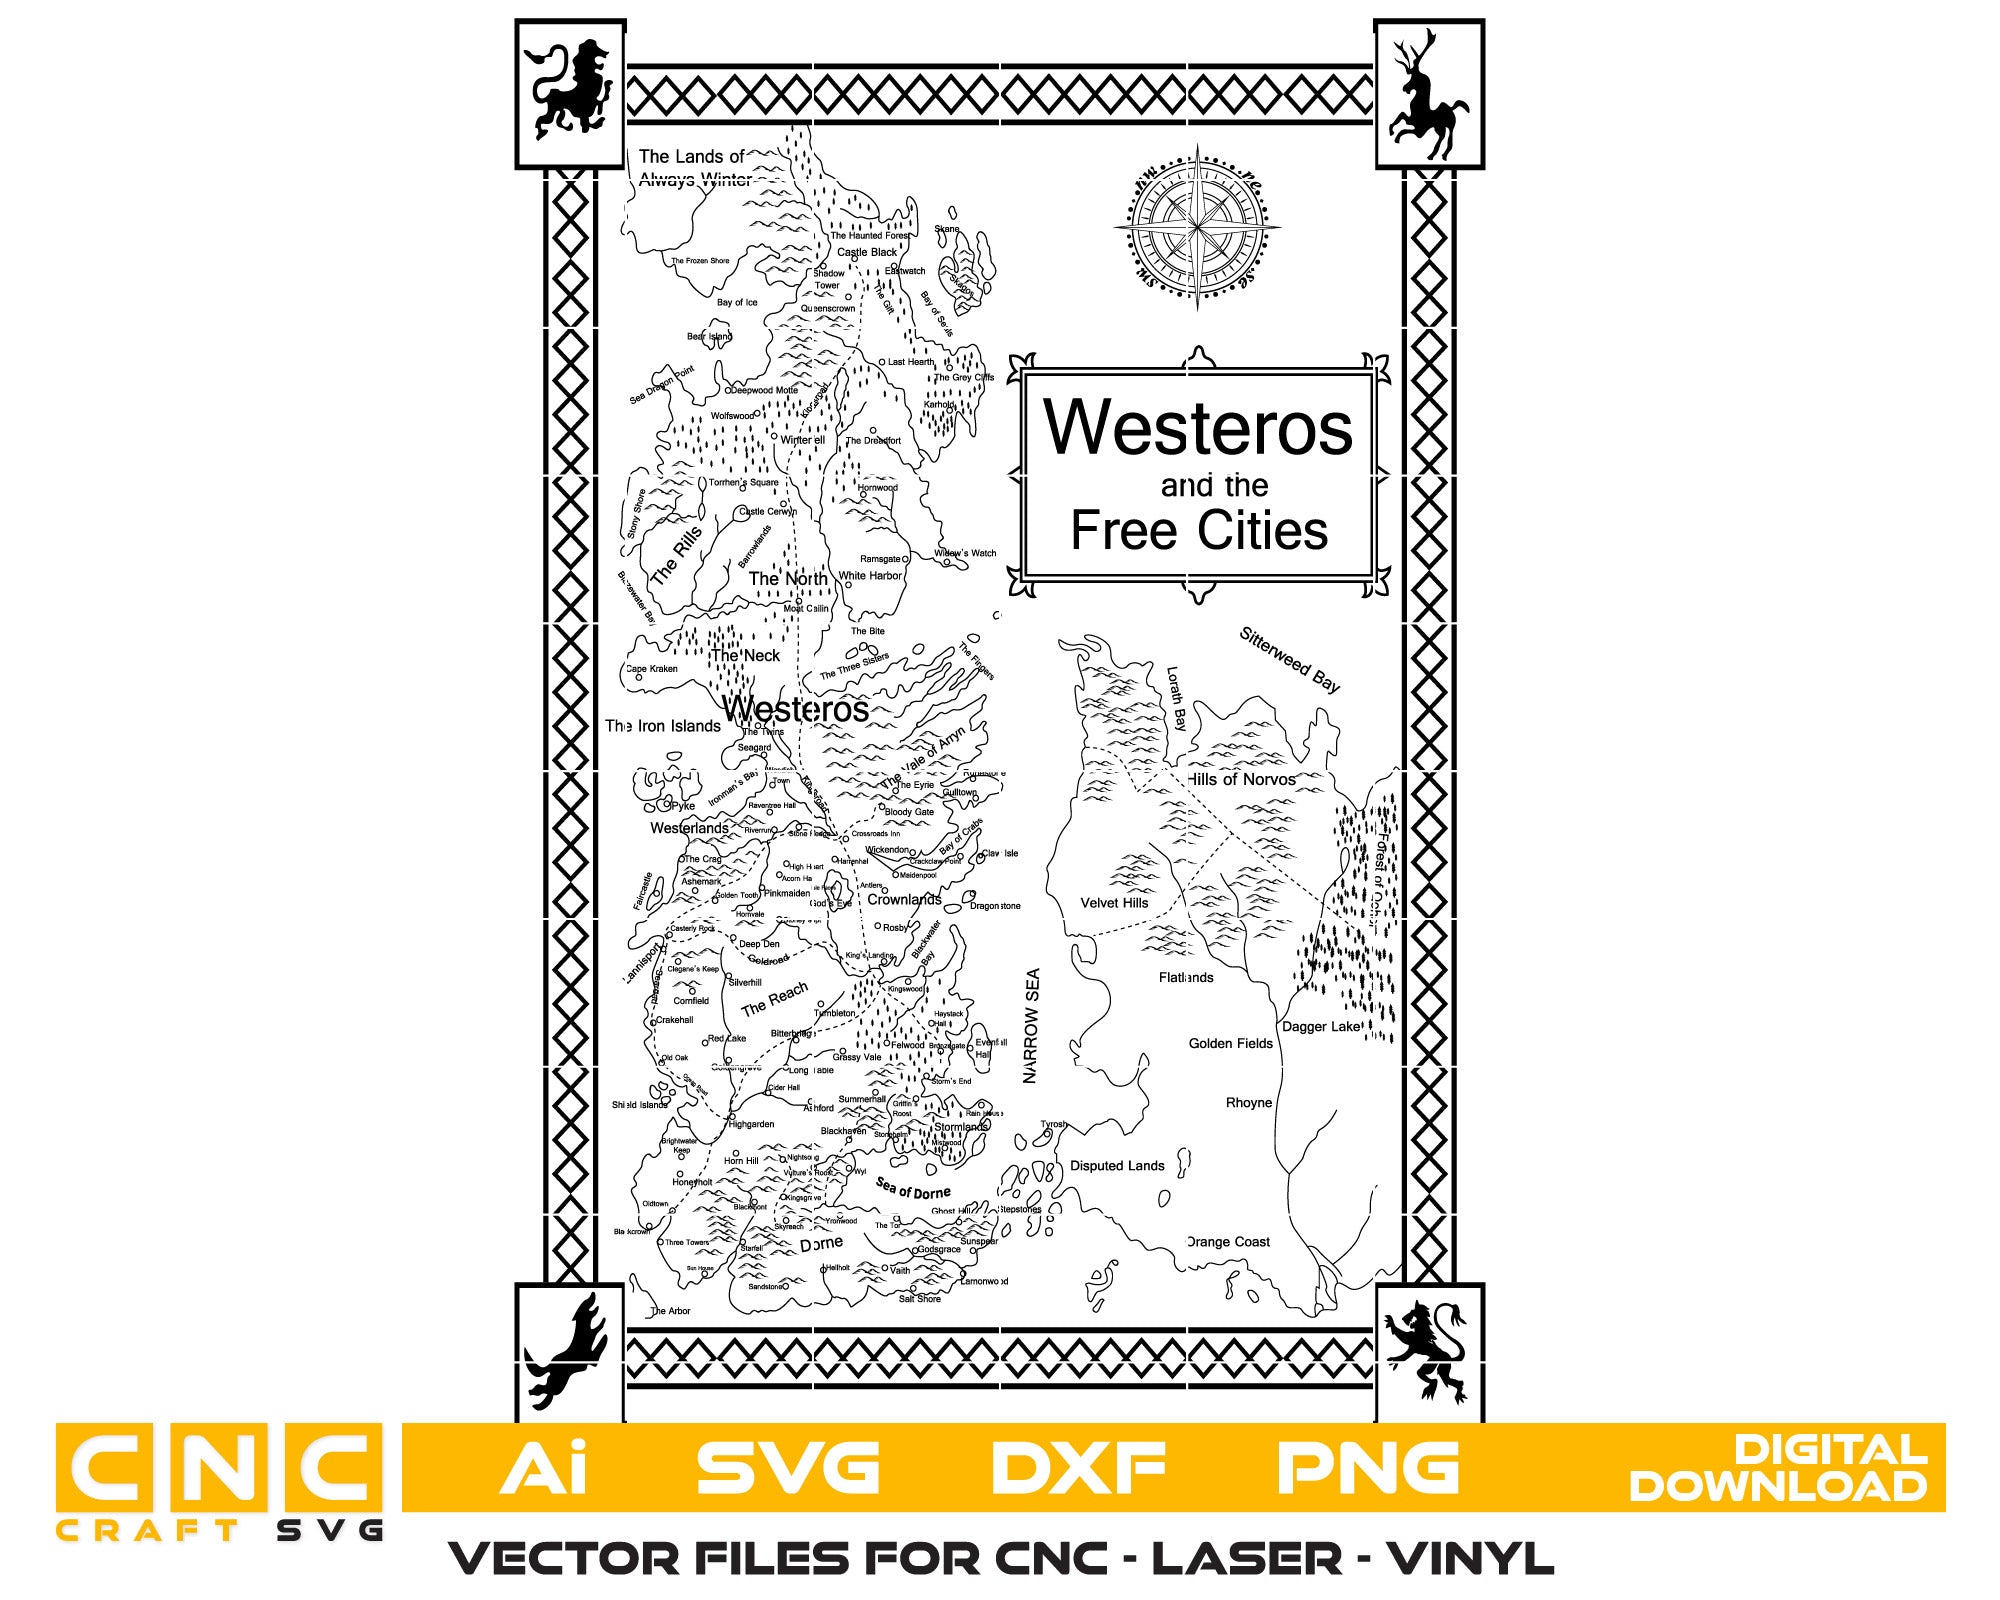 Westeros and the Free Cities map vector art